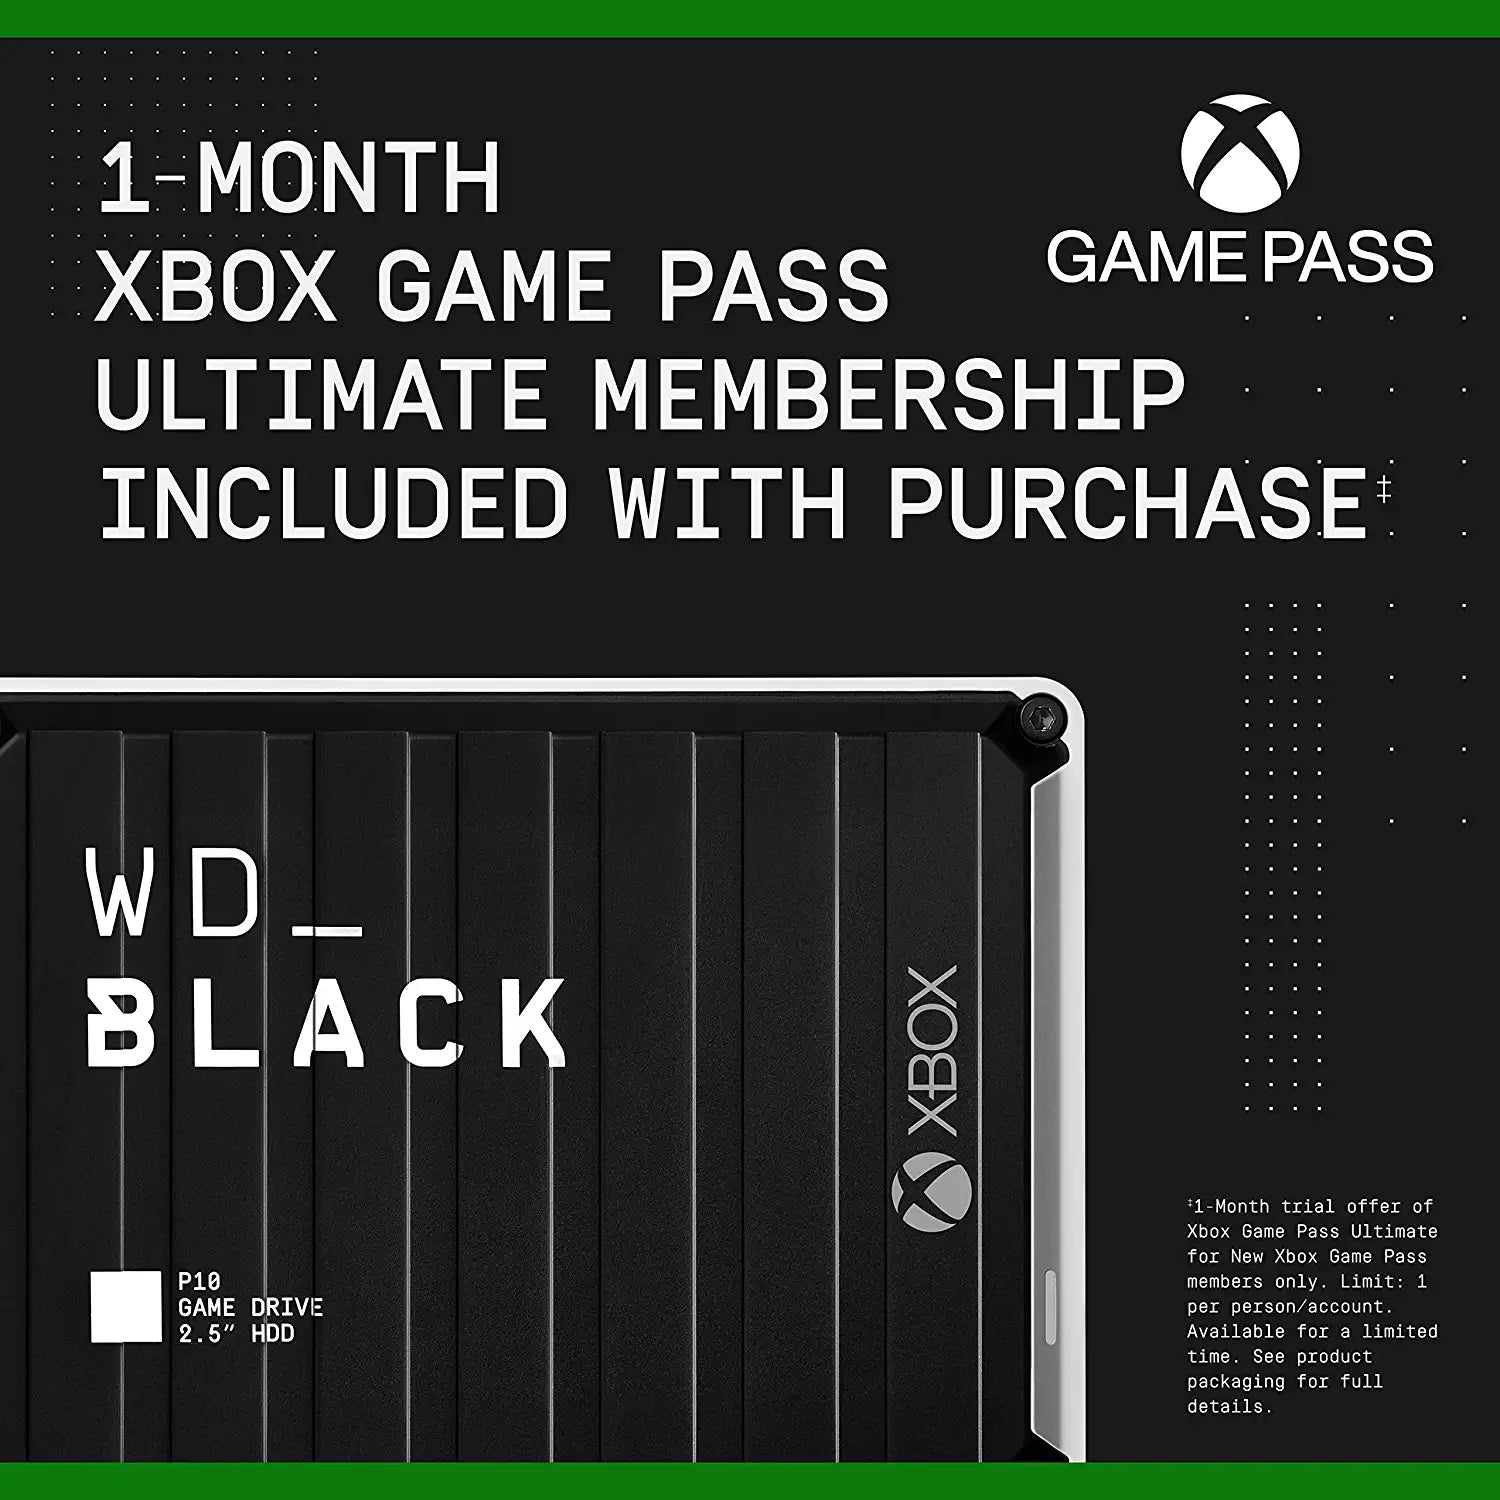 WD_BLACK 3TB P10 Game Drive for Xbox - Portable External Hard Drive with 1-Month Xbox Game Pass - WDBA5G0030BBK-WESN